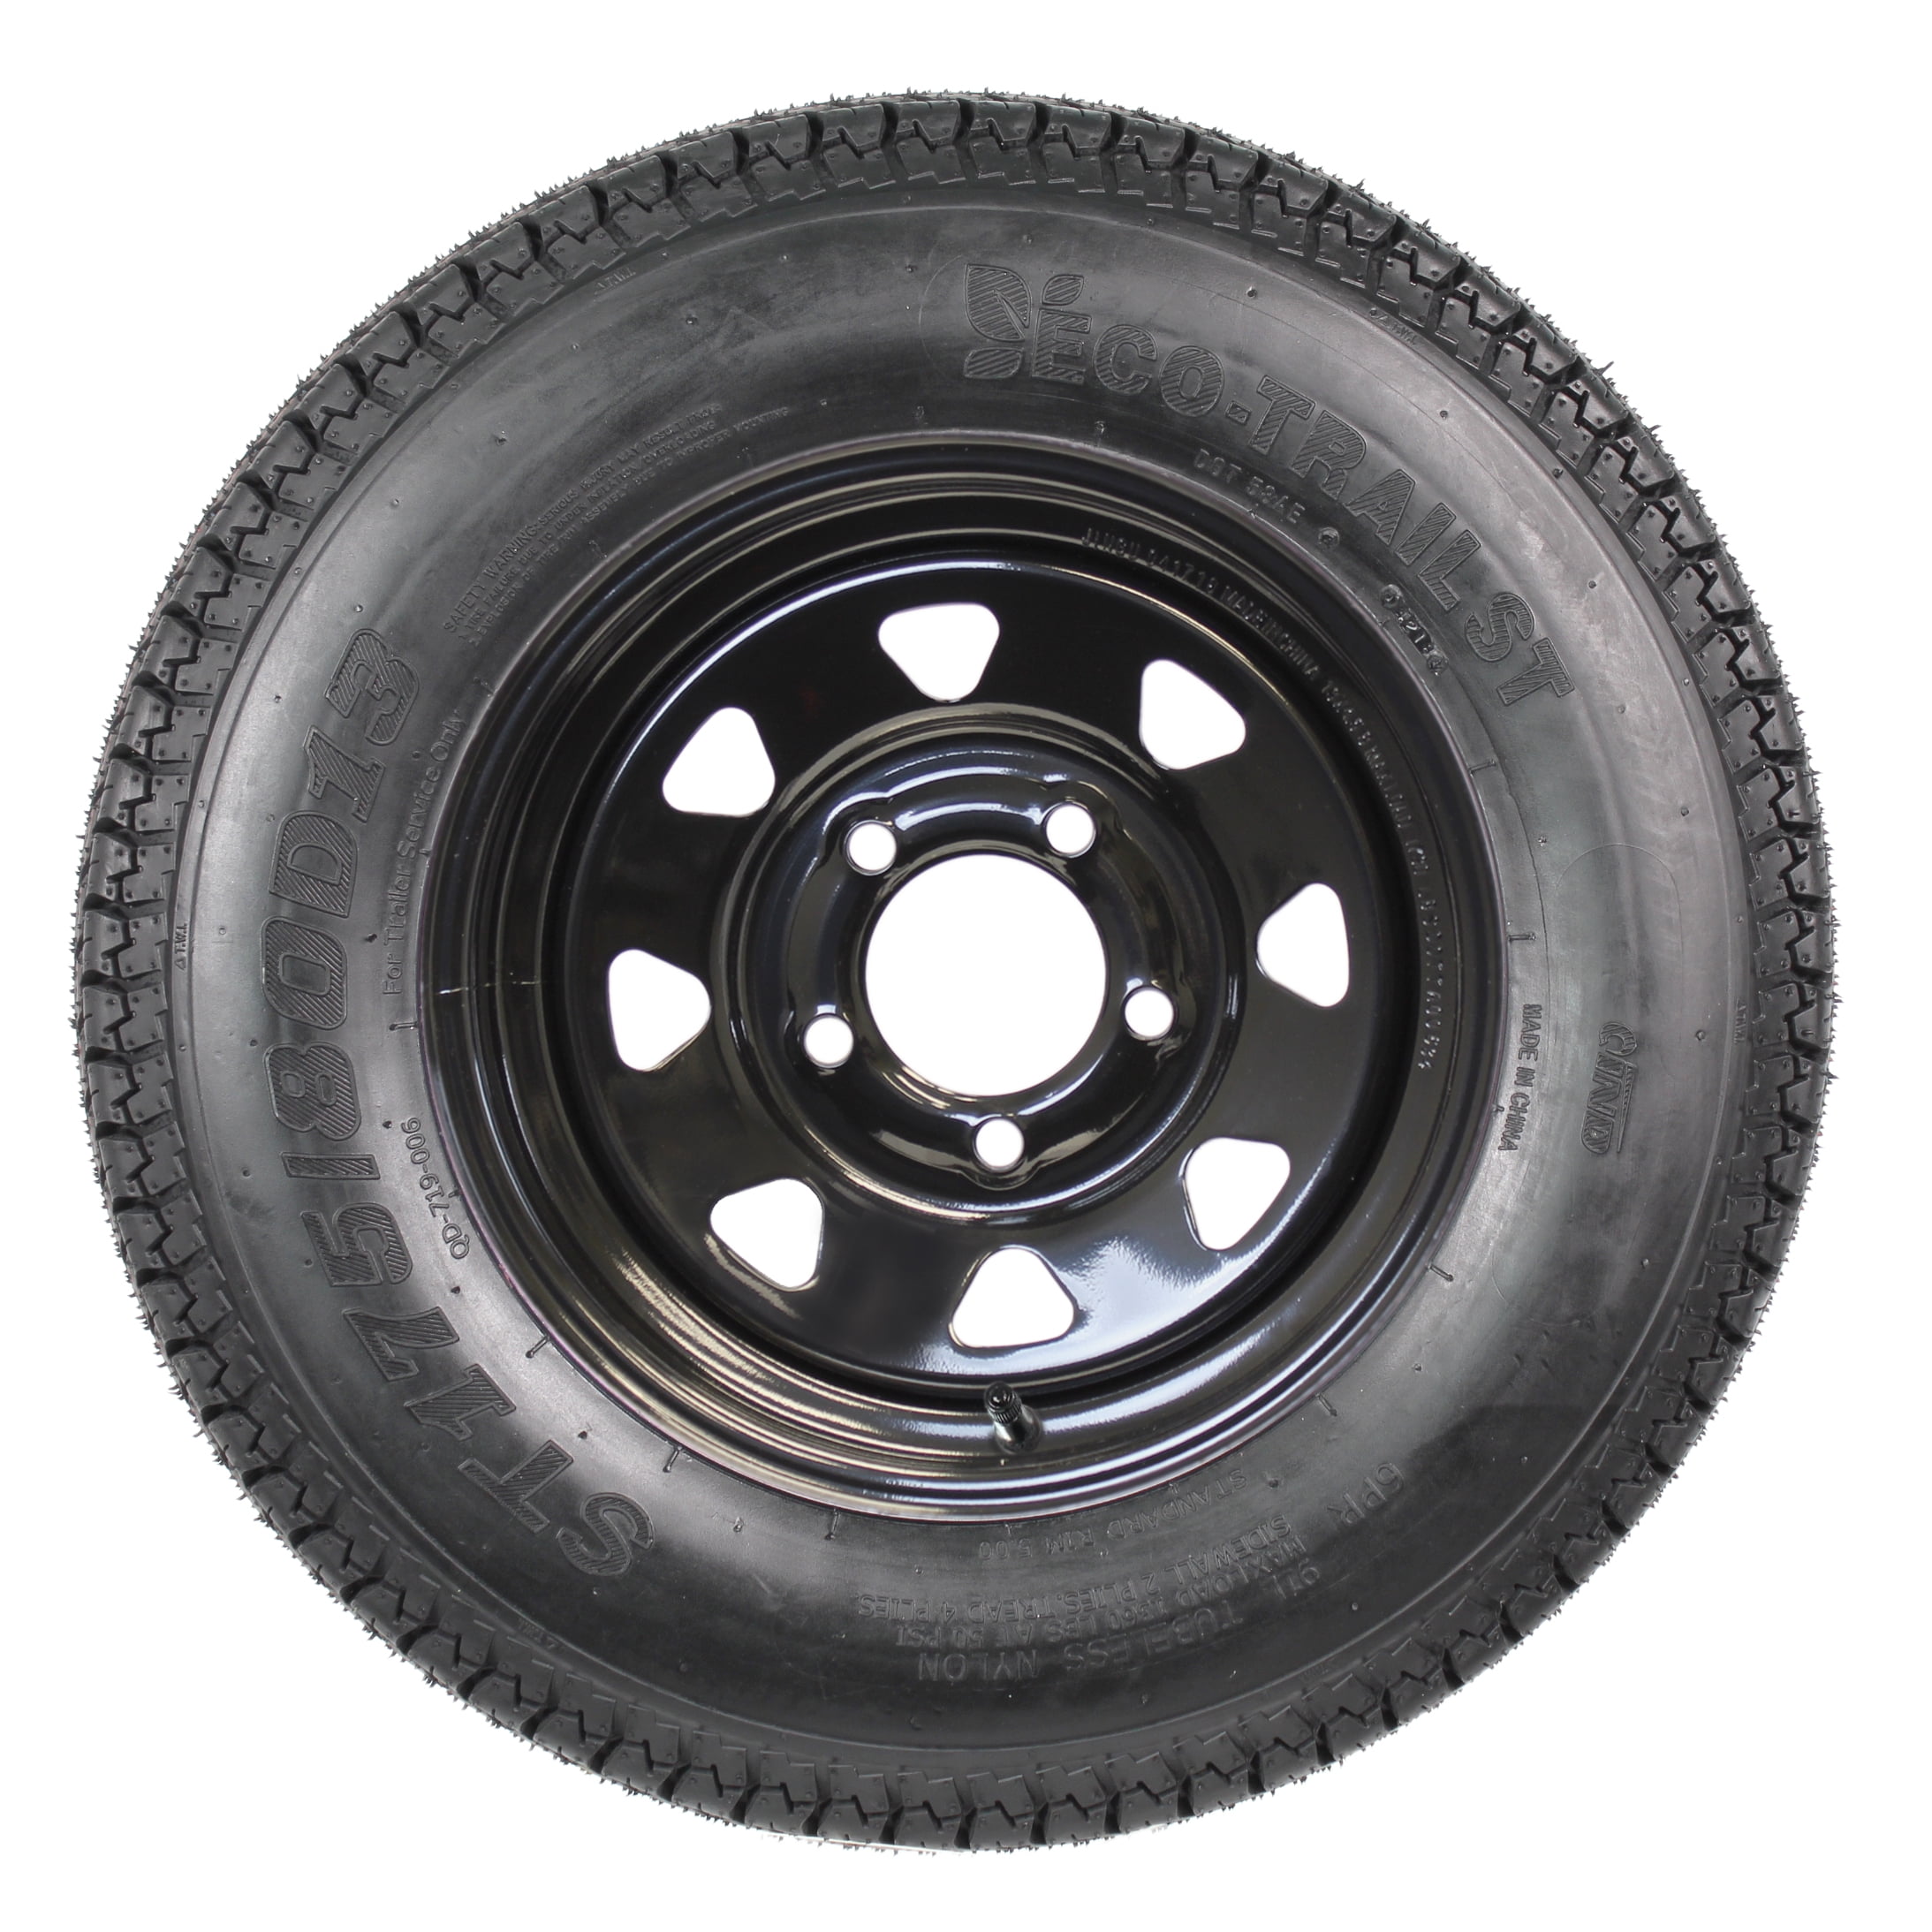 Weize ST175/80R13 trailer tire ST175/80-13 175 80R13 6 Ply Load Range C Radial 91/87 M Set of 2 